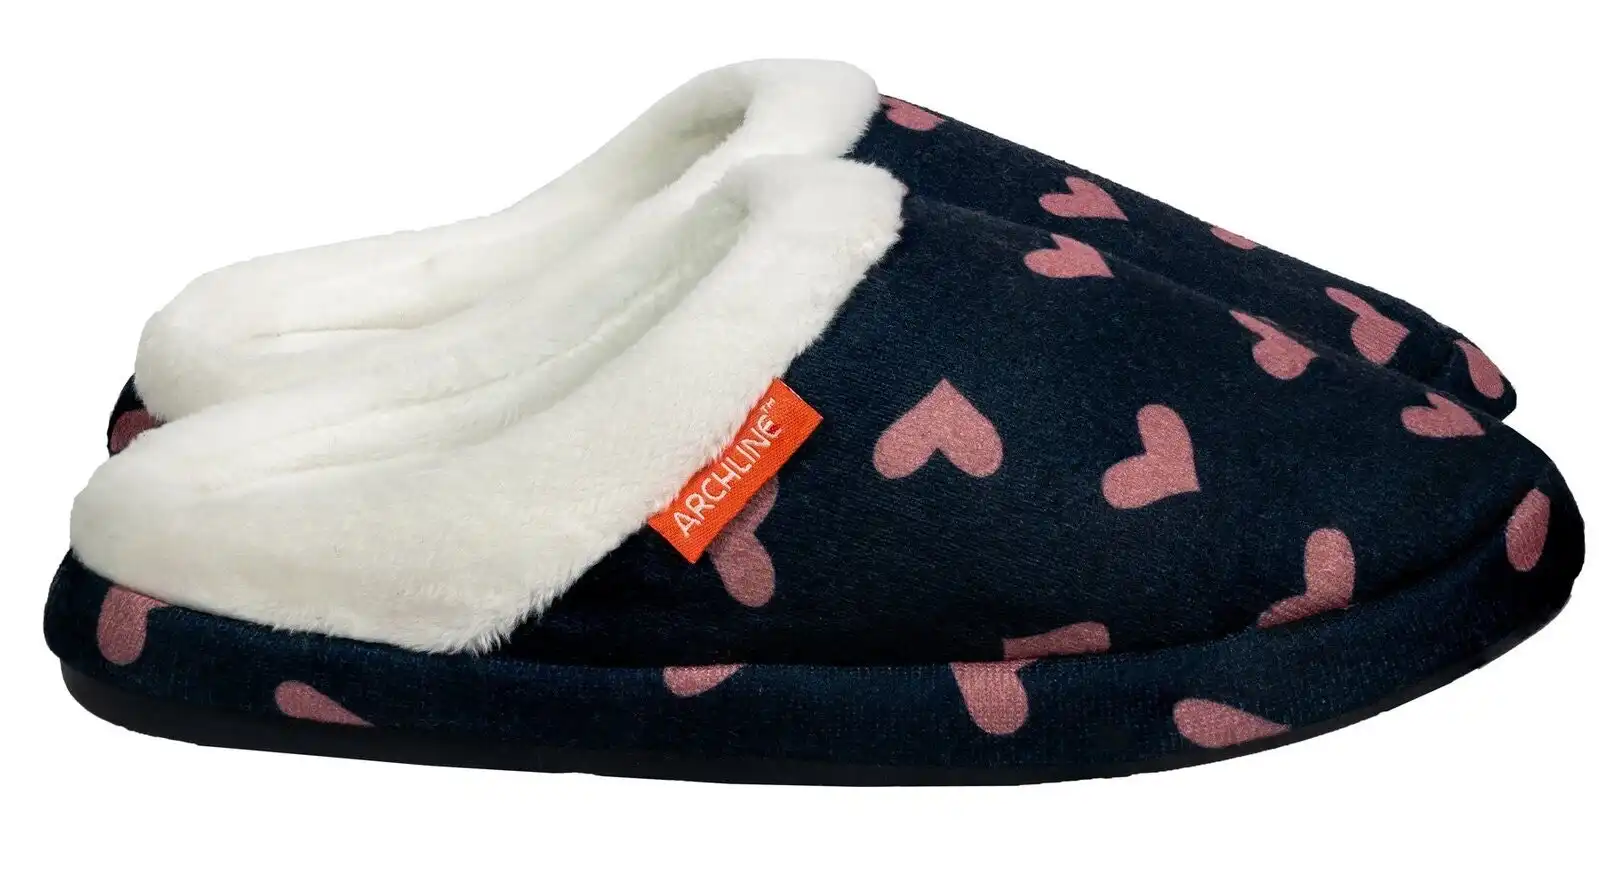 Archline Orthotic Slippers Slip On Scuffs Medical Pain Relief Moccasins - Navy with Hearts